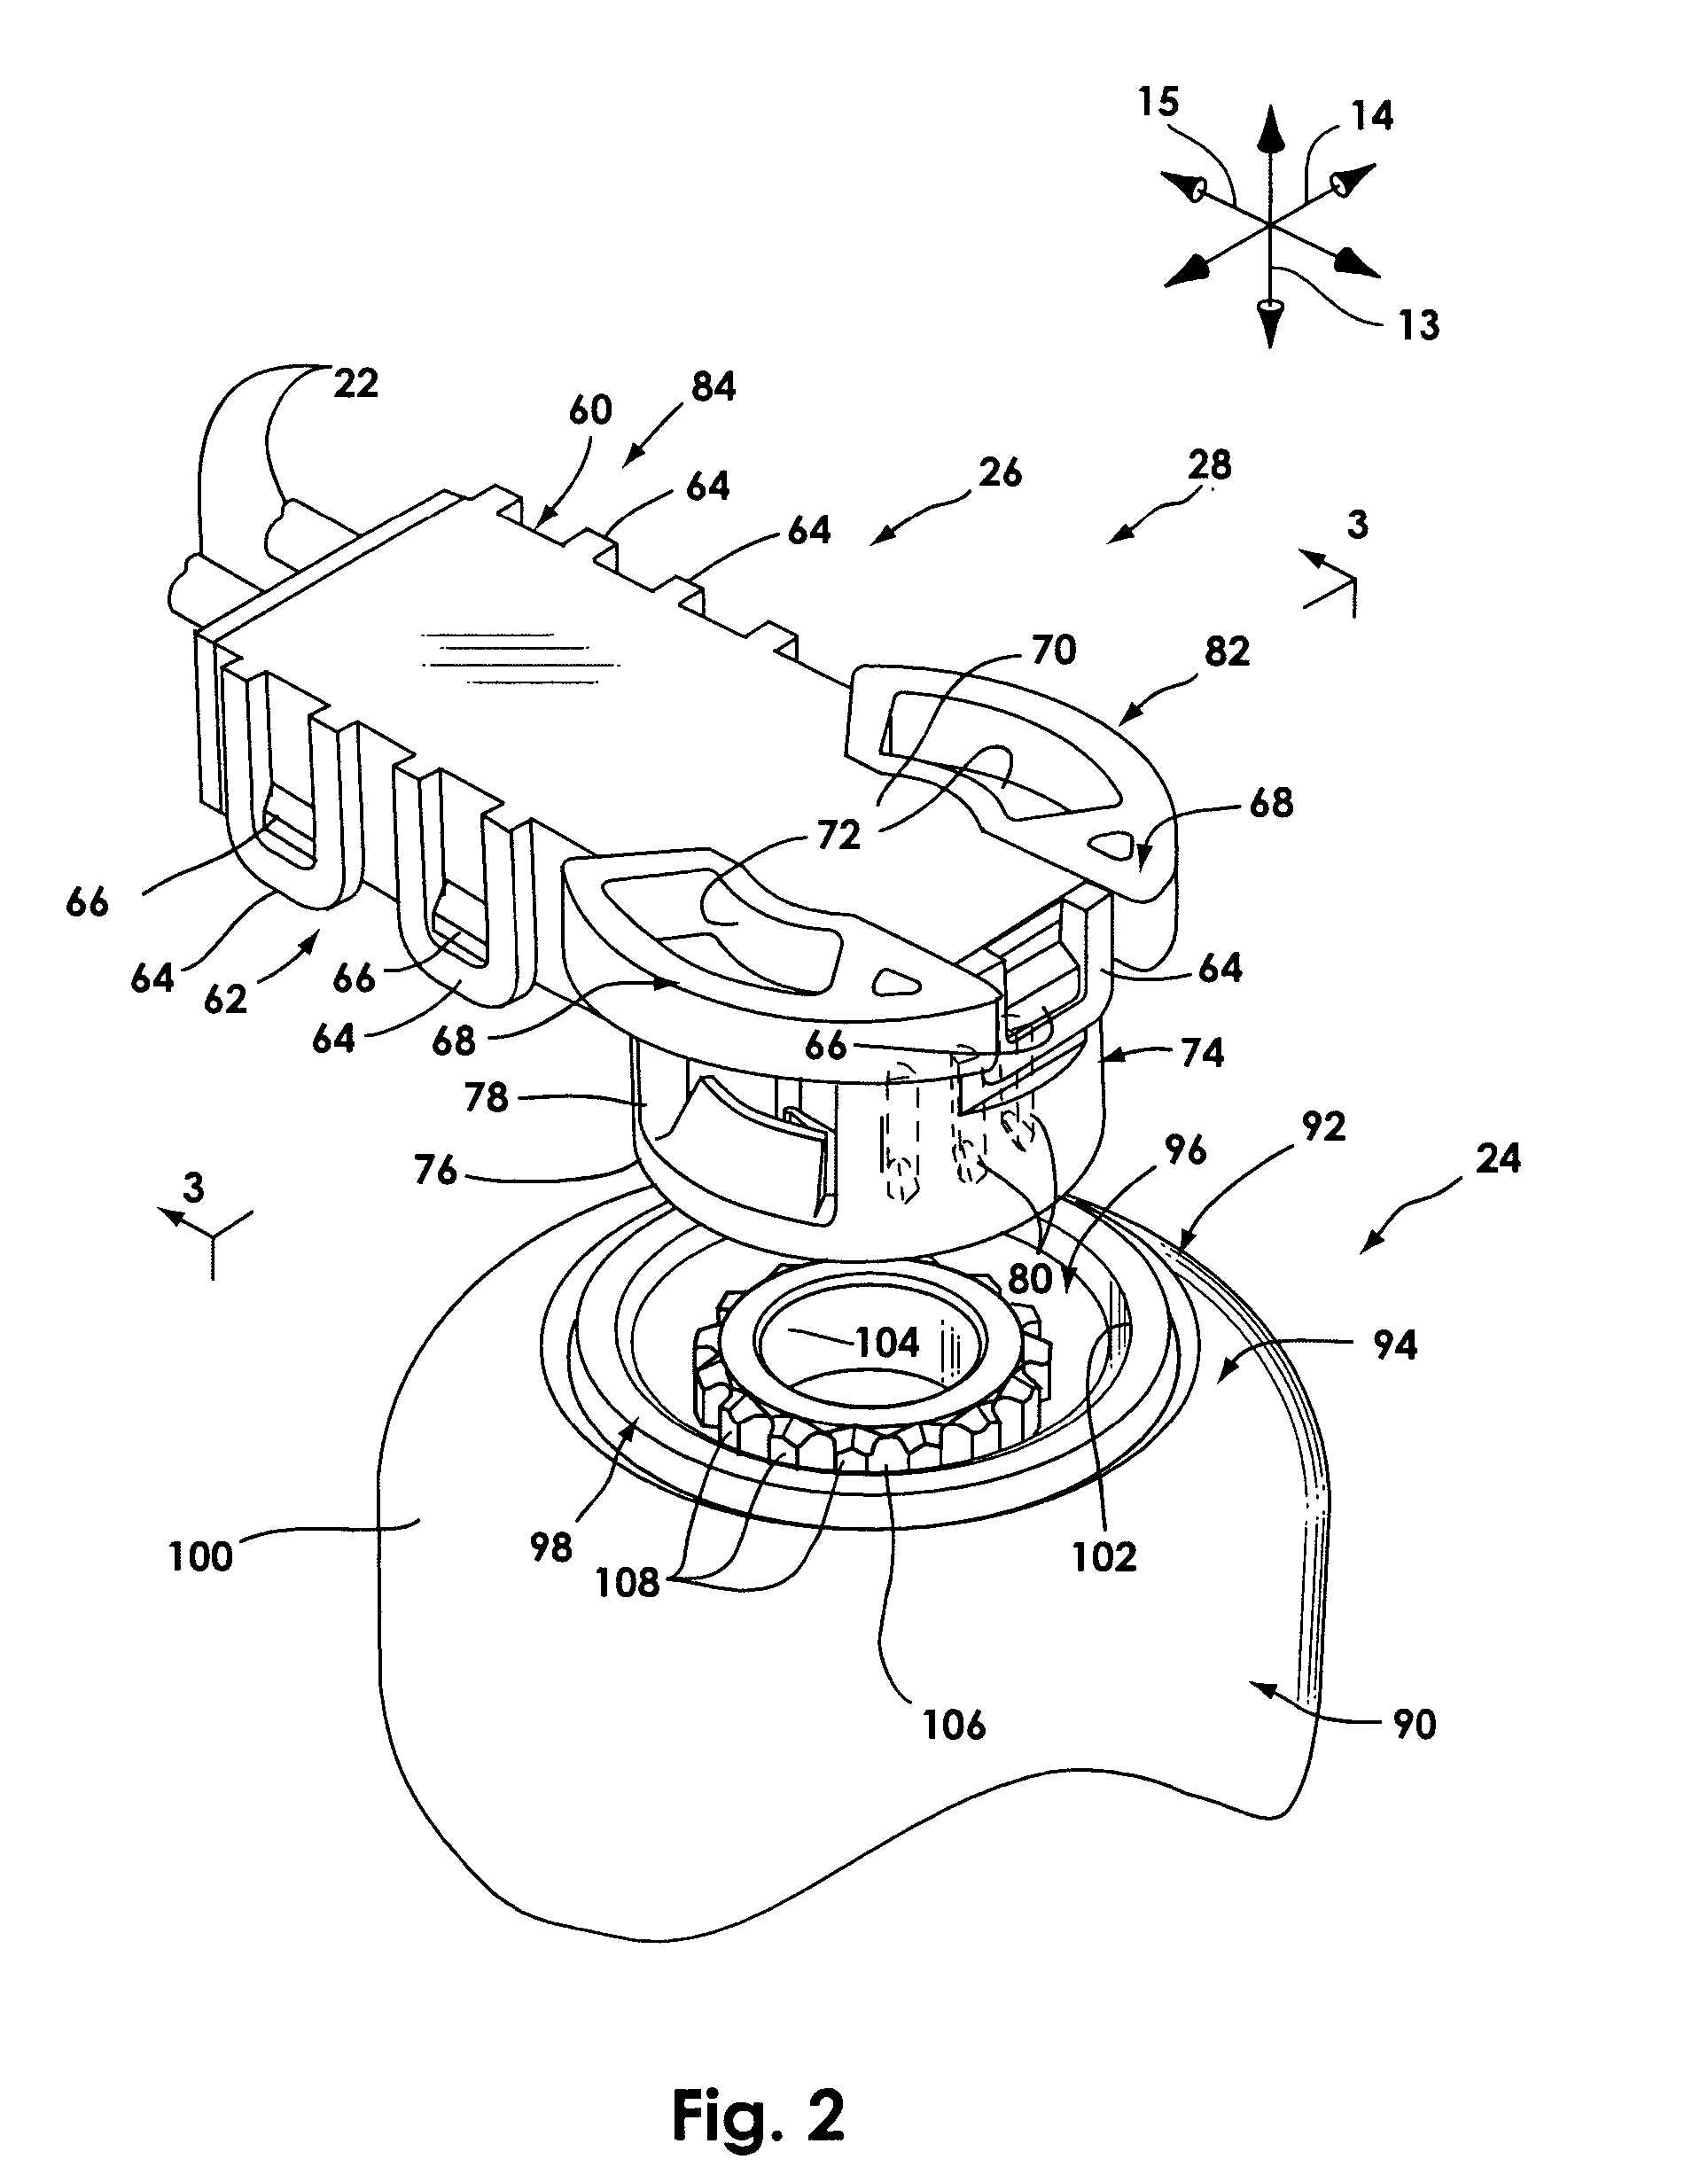 Electrical connection apparatus and method for an airbag inflator